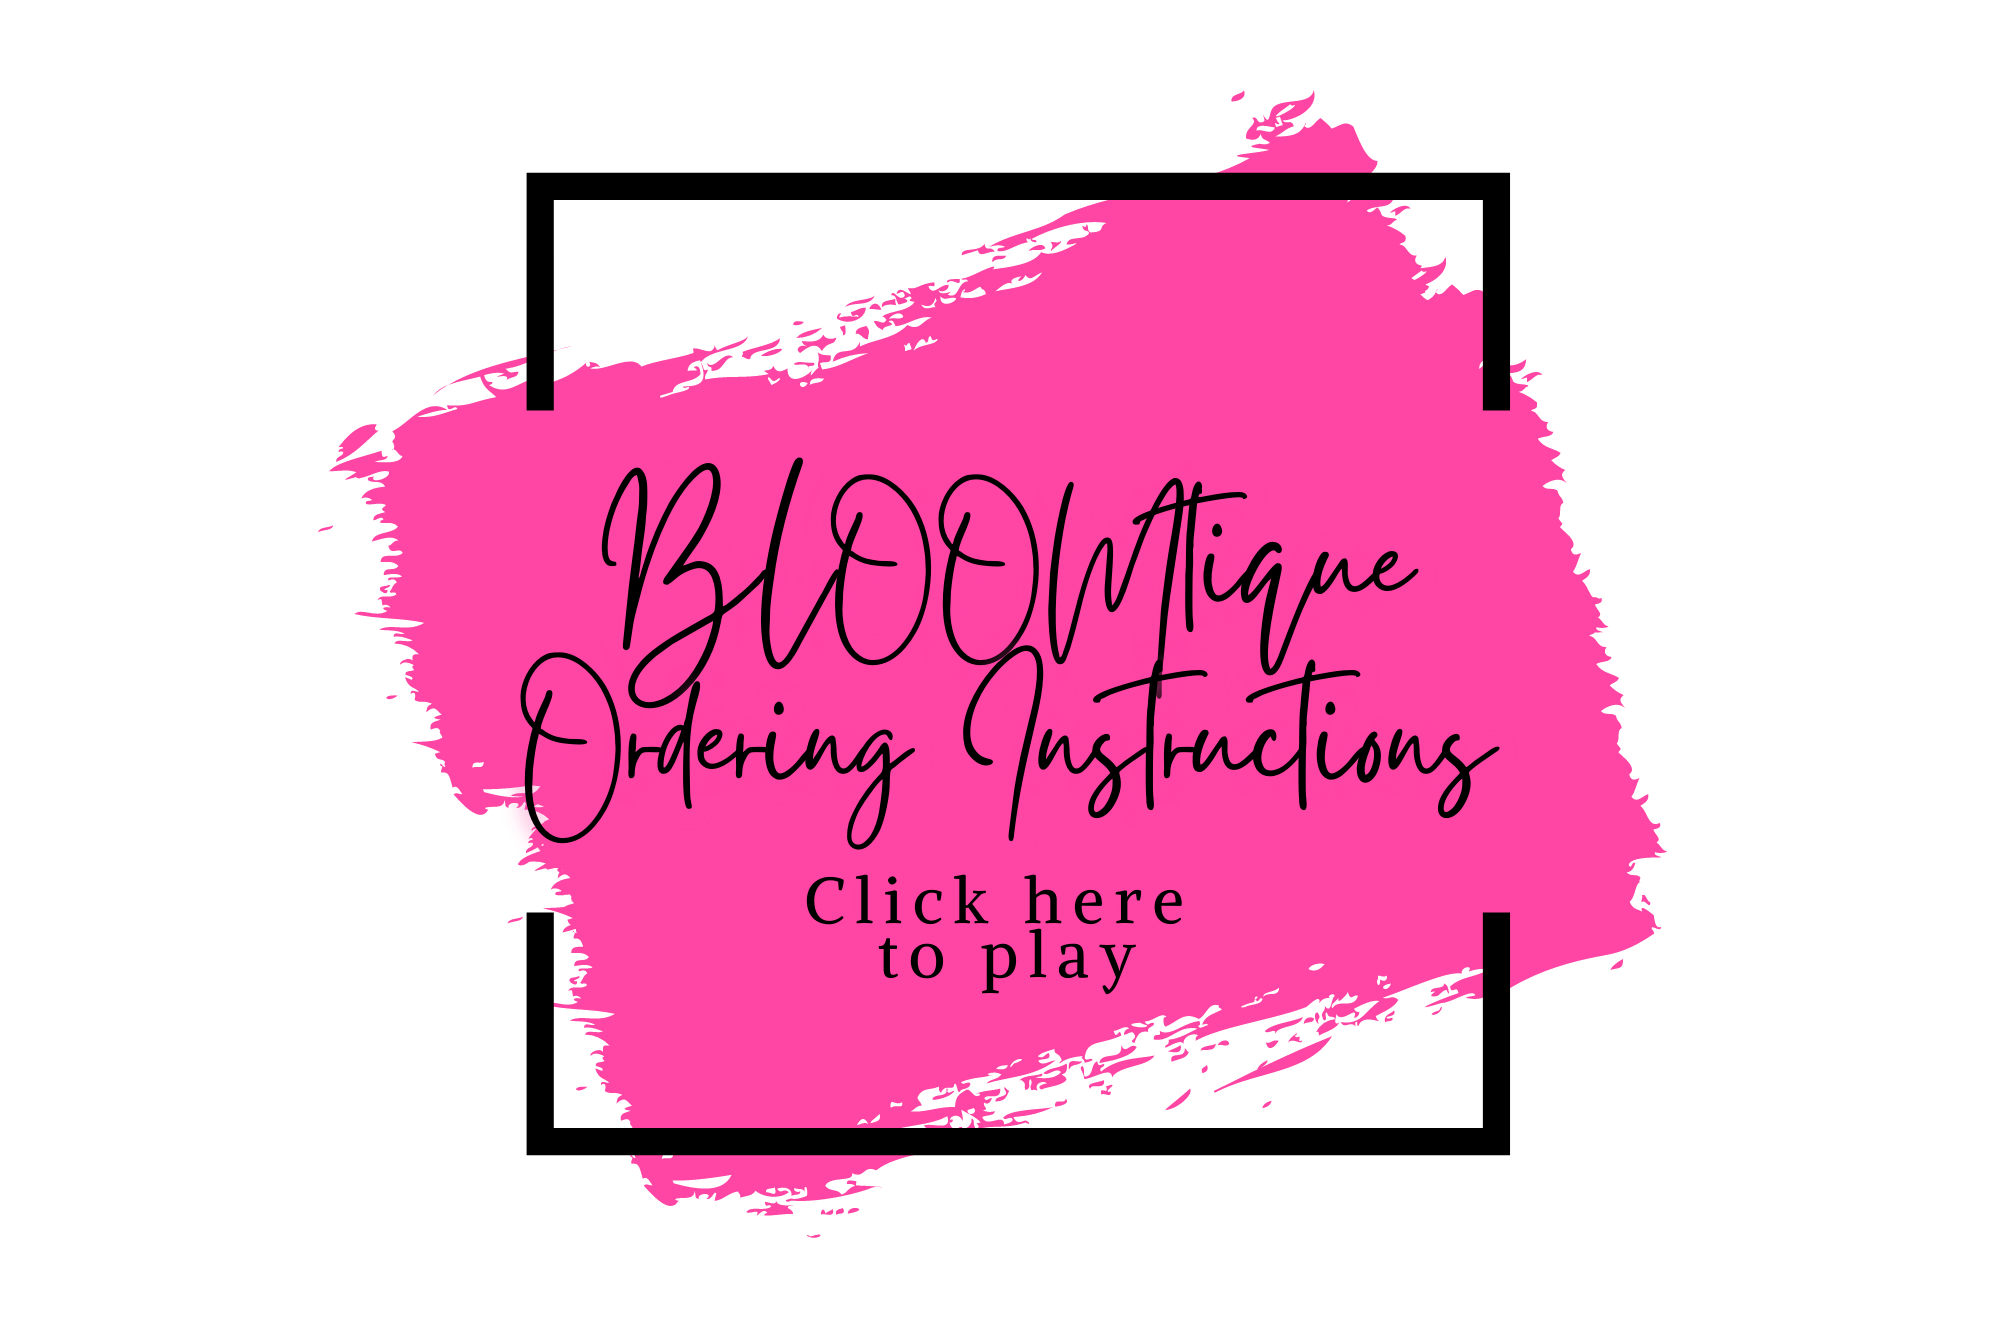 Load video: BLOOMtique Ordering Instructions